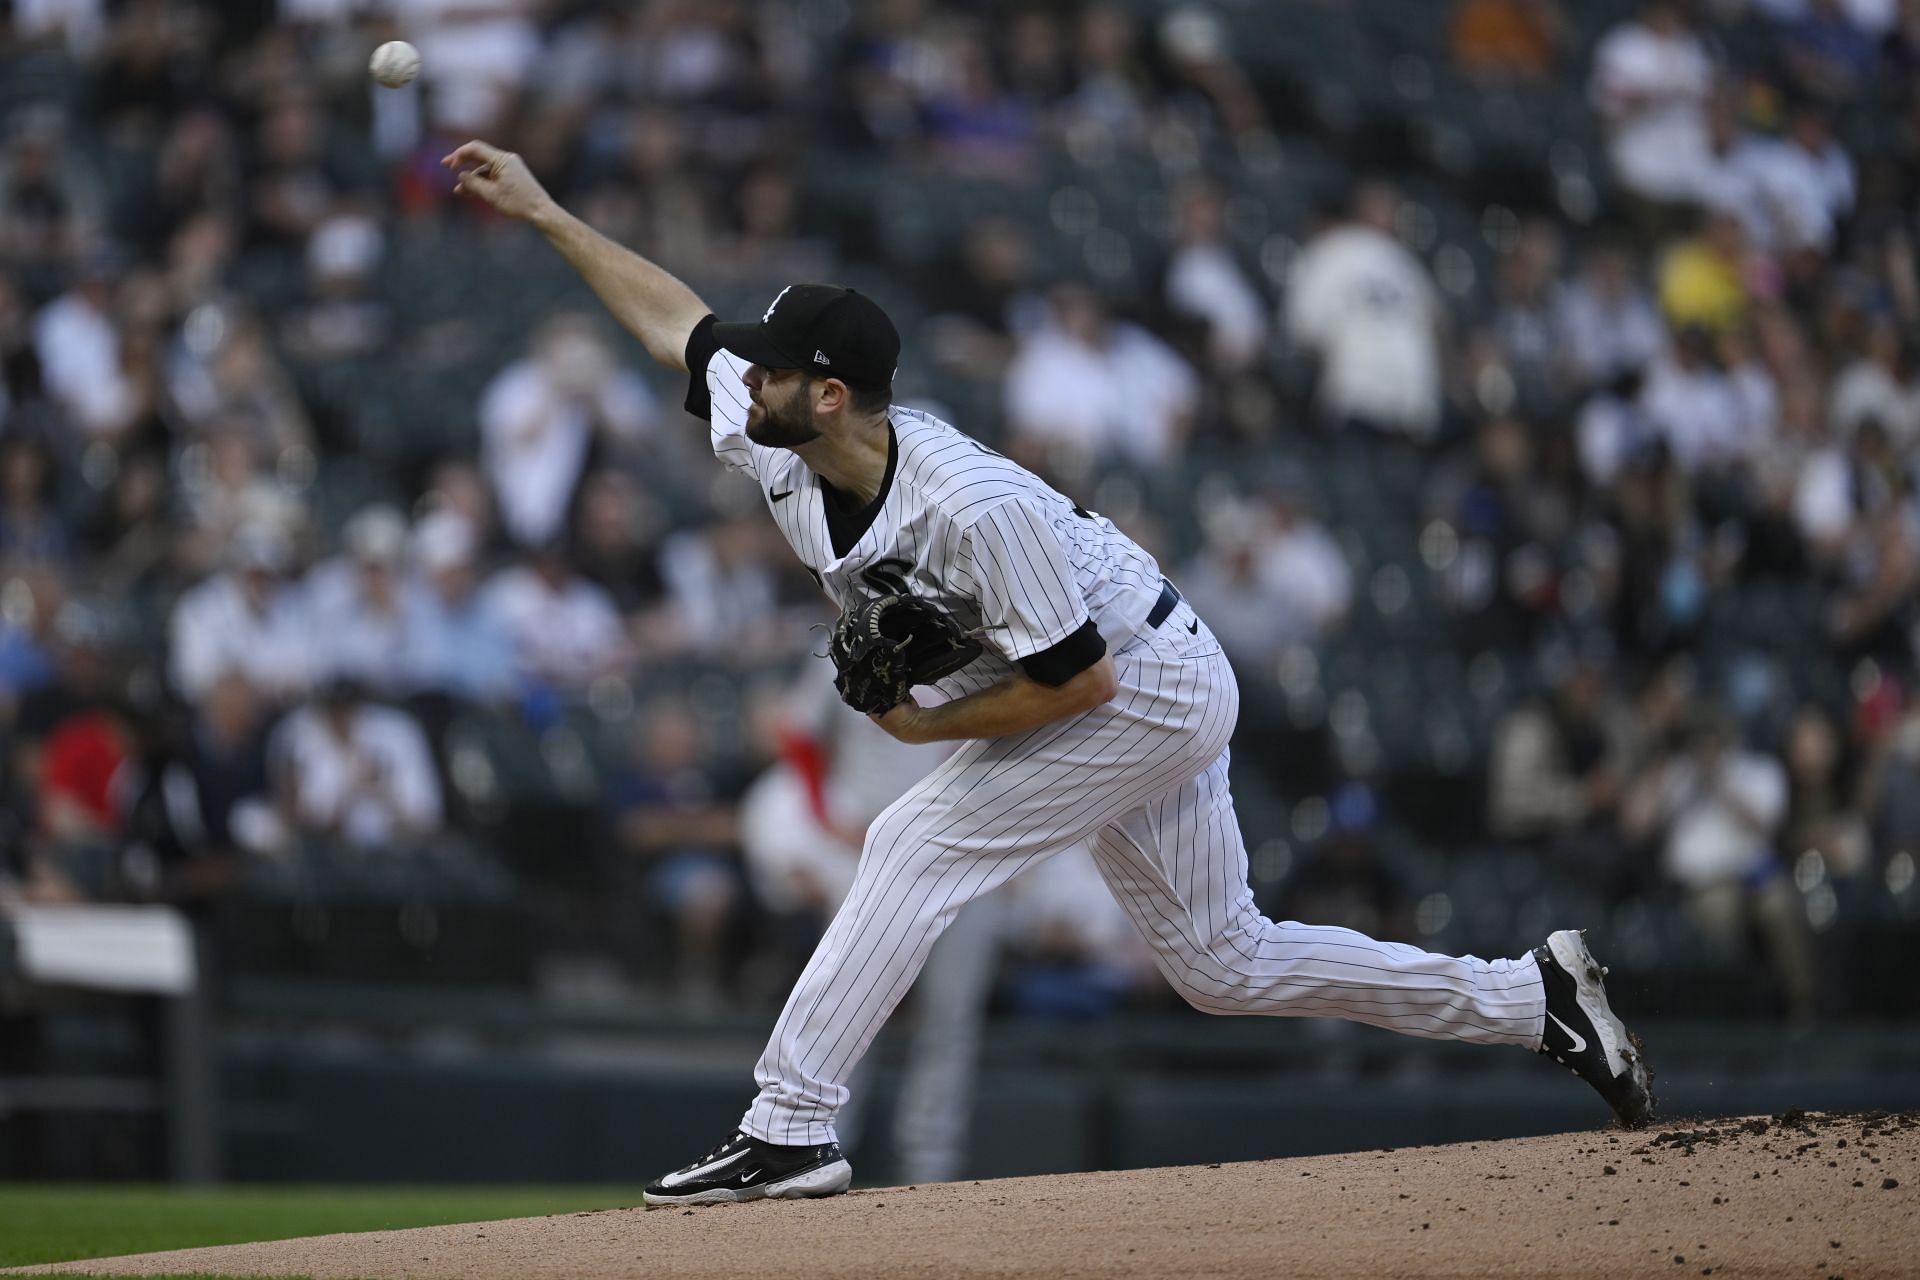 Lucas Giolito has established himself as one of the best pitchers in MLB since his breakout season in 2019.